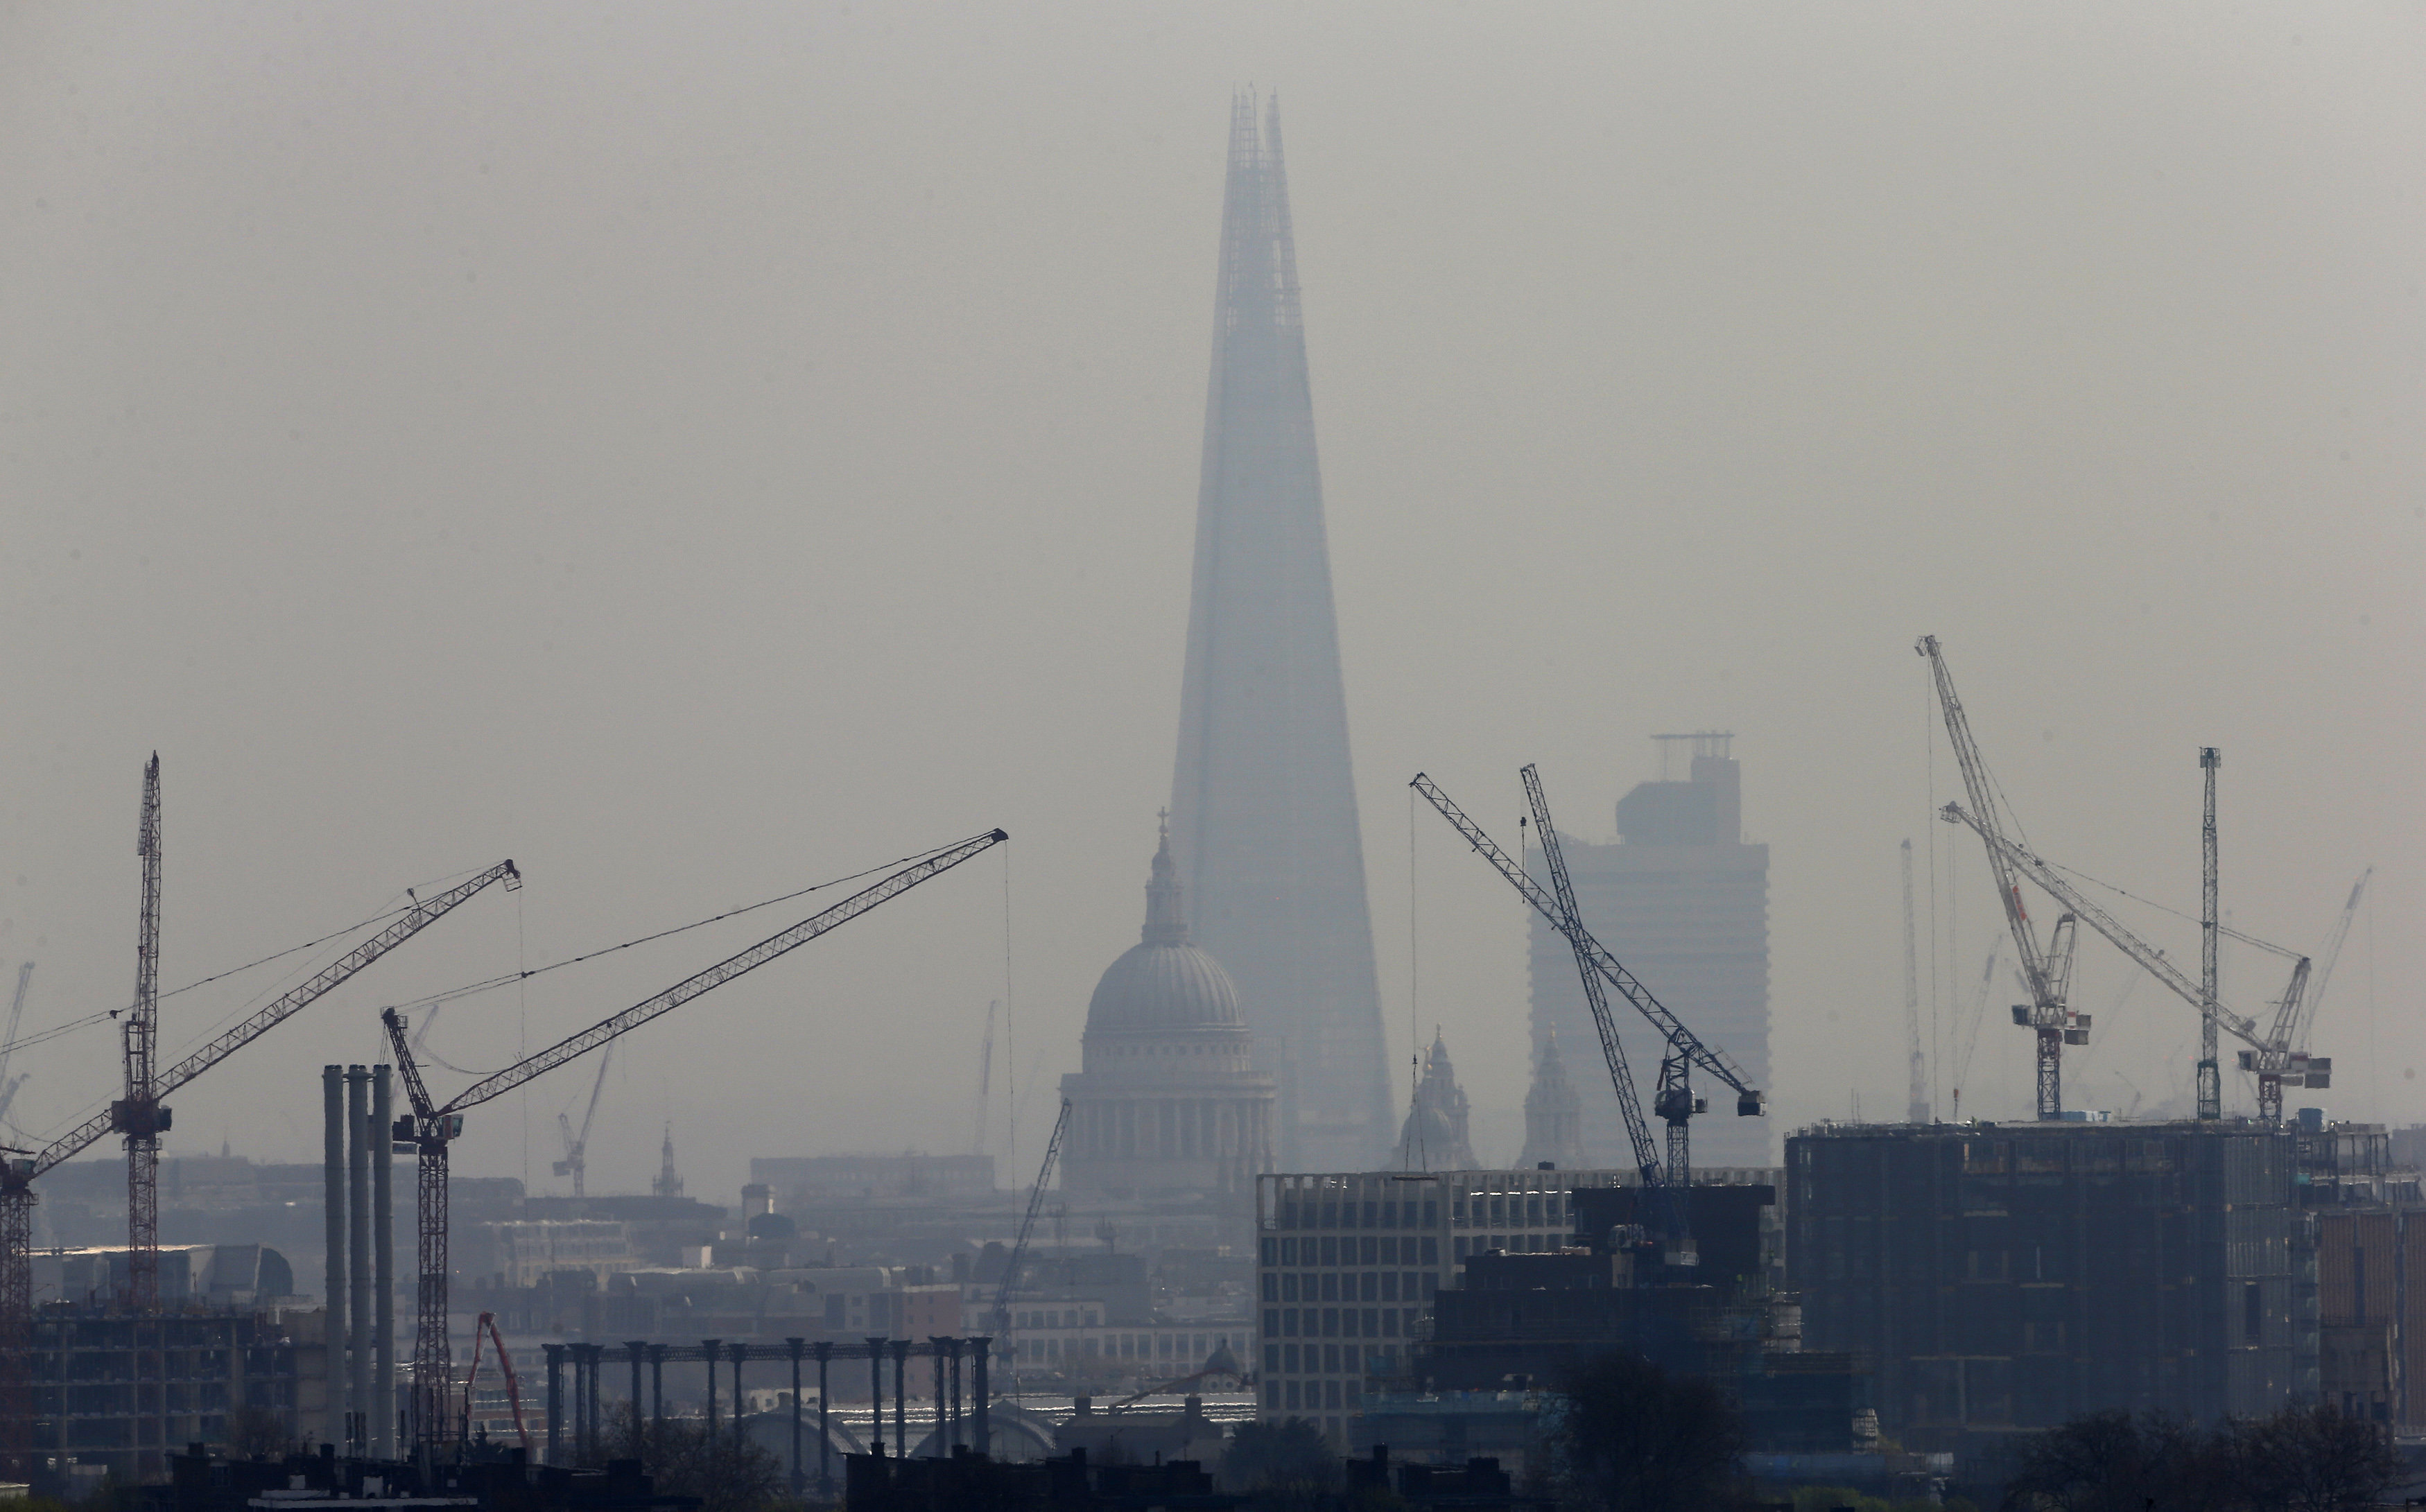 <strong>An air pollution report has found that 44 UK towns and cities have dangerous air quality levels&nbsp;</strong>